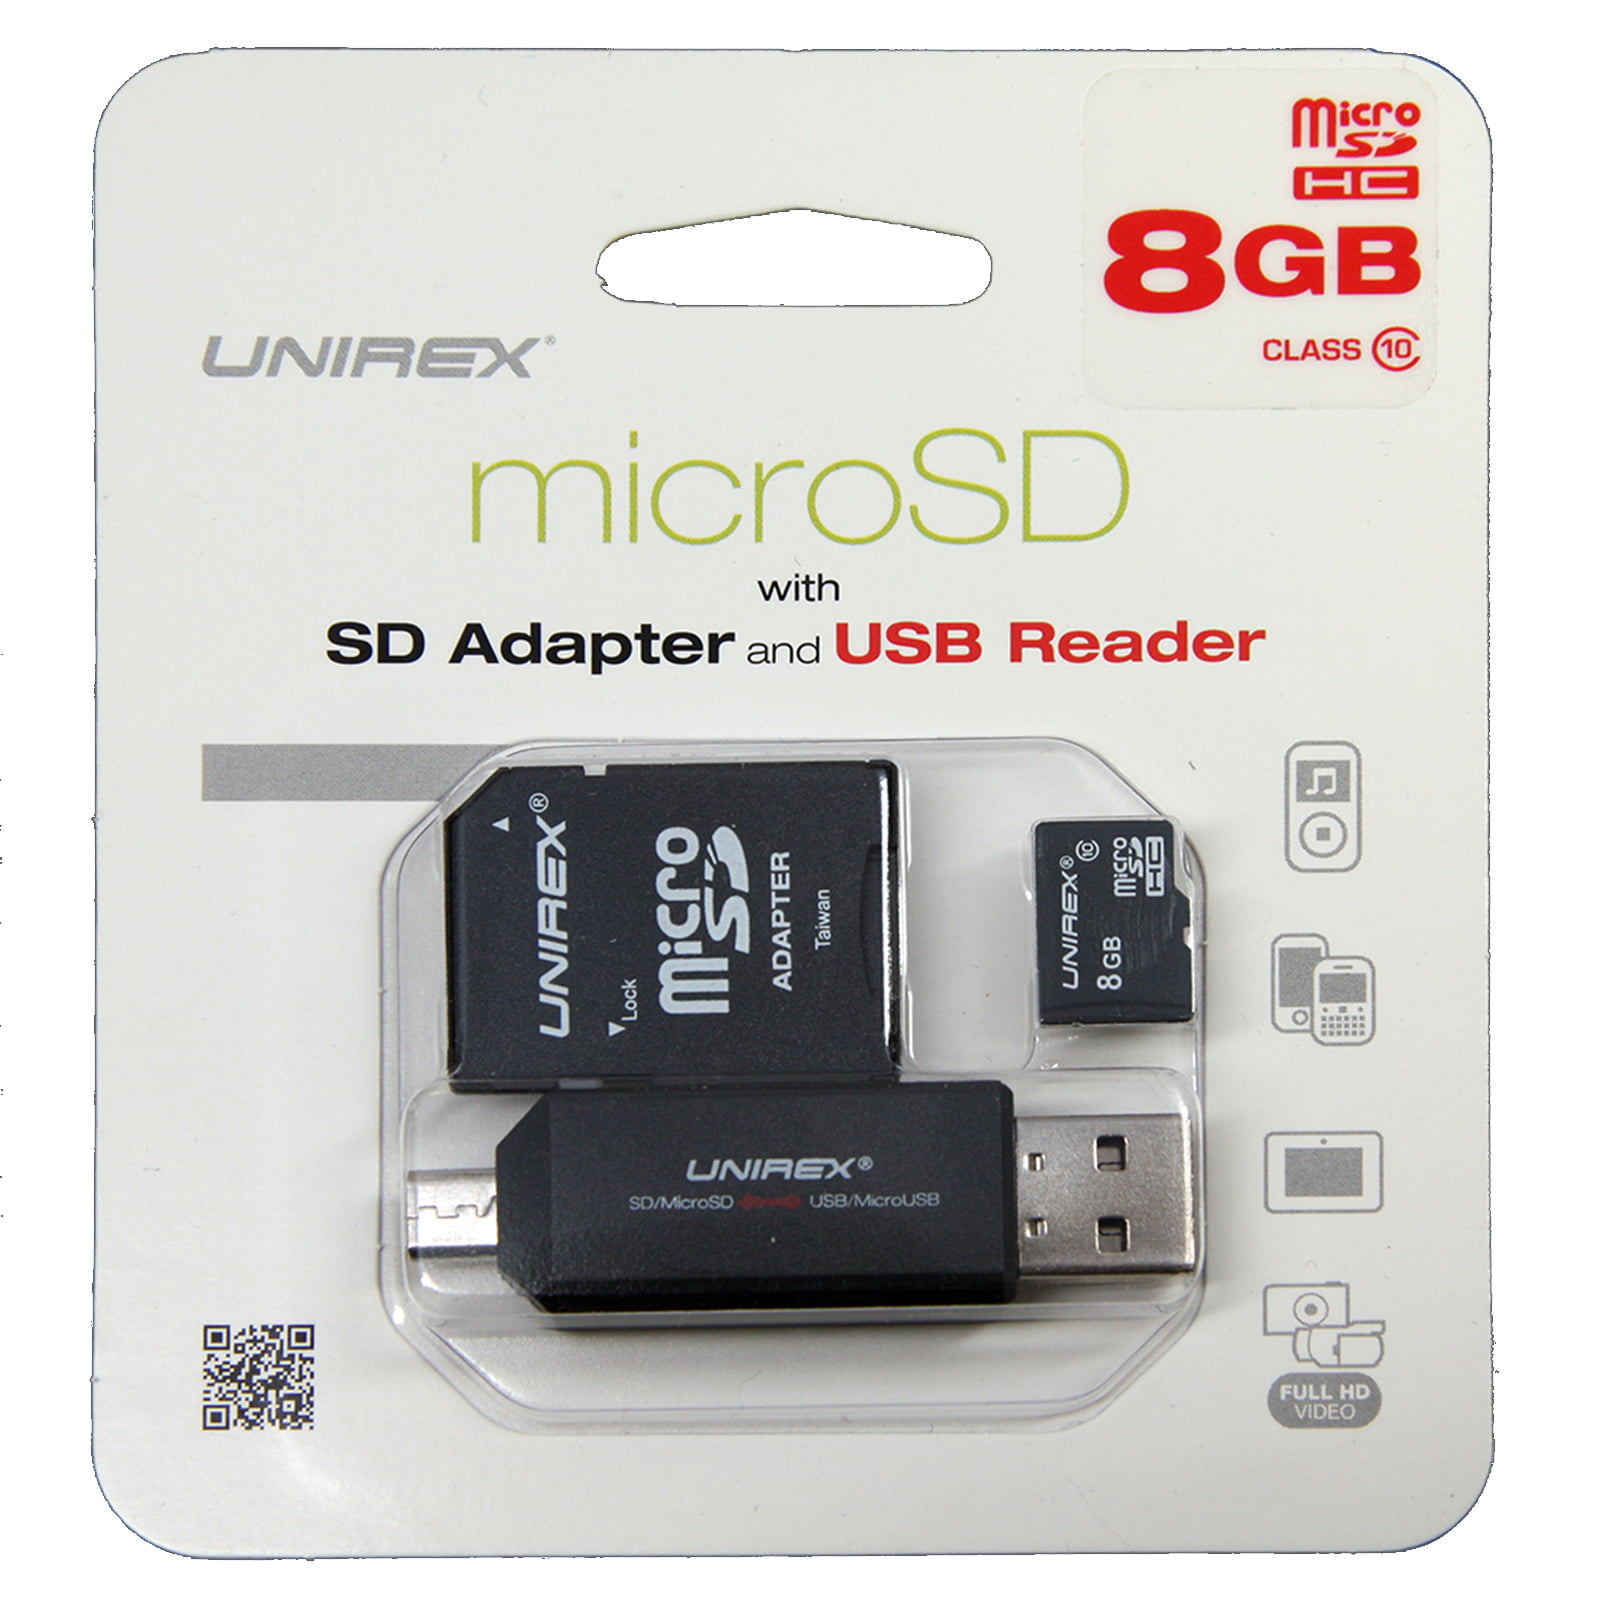 MicroSD with SD Adapter - UNIREX TECHNOLOGIES